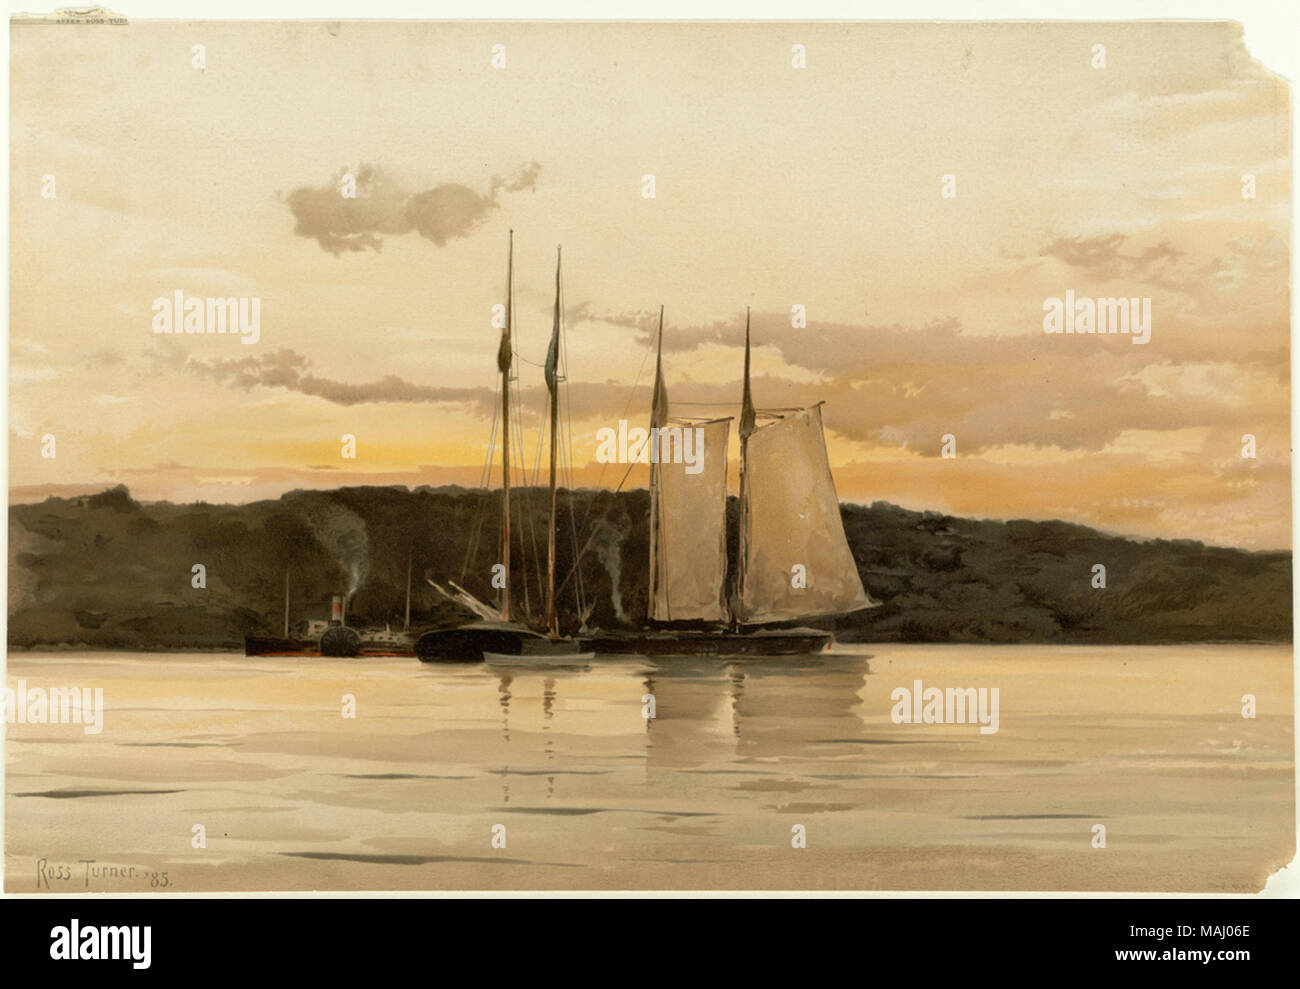 File name: 07 11 001221 Title: Boats at Sunset Creator/Contributor: Turner, Ross, 1847-1916 (artist); L. Prang & Co. (publisher) Date issued:  1886 Physical description note: Genre: Chromolithographs; Marine prints Notes: Title supplied by cataloger. Location: Boston Public Library,    on 2011-08-04: Camera: Sinar AG Sinarback 54 FW, Sinar m Stock Photo